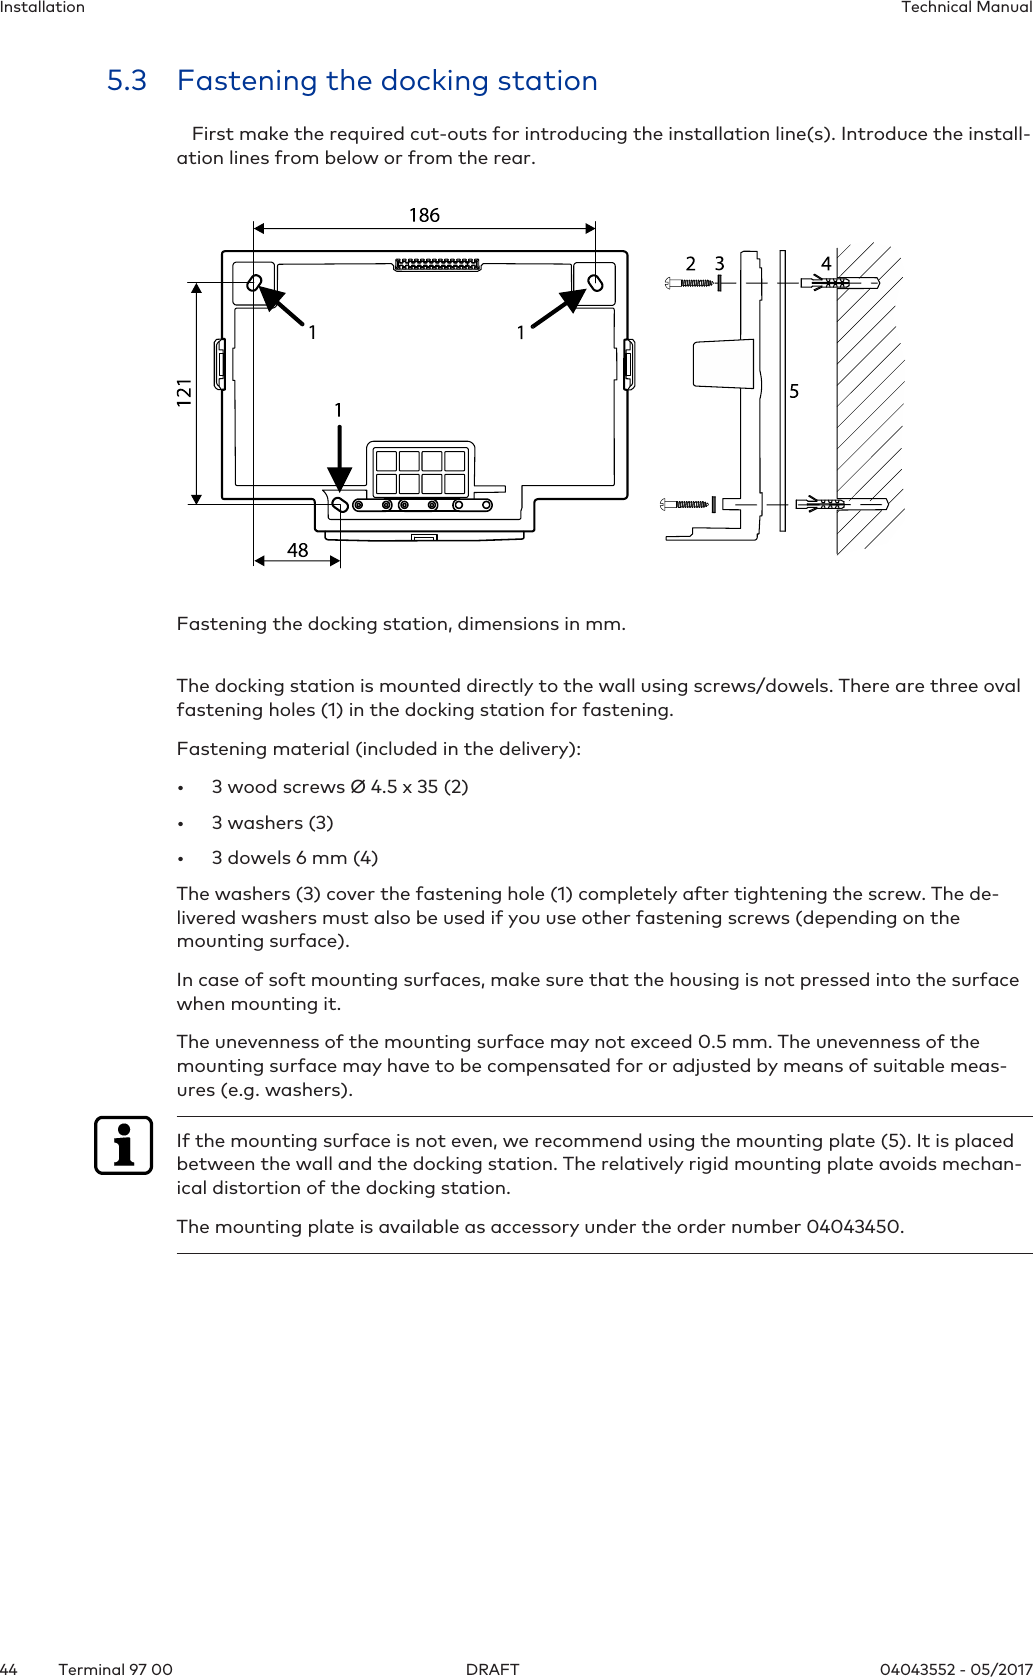 Installation Technical Manual44 04043552 - 05/2017Terminal 97 00 DRAFT5.3 Fastening the docking station   First make the required cut-outs for introducing the installation line(s). Introduce the install-ation lines from below or from the rear.Fastening the docking station, dimensions in mm. The docking station is mounted directly to the wall using screws/dowels. There are three ovalfastening holes(1) in the docking station for fastening.Fastening material (included in the delivery):• 3 wood screws Ø 4.5 x 35 (2)• 3 washers (3)• 3 dowels 6 mm (4)The washers (3) cover the fastening hole (1) completely after tightening the screw. The de-livered washers must also be used if you use other fastening screws (depending on themounting surface).In case of soft mounting surfaces, make sure that the housing is not pressed into the surfacewhen mounting it.The unevenness of the mounting surface may not exceed 0.5 mm. The unevenness of themounting surface may have to be compensated for or adjusted by means of suitable meas-ures (e.g. washers).If the mounting surface is not even, we recommend using the mounting plate (5). It is placedbetween the wall and the docking station. The relatively rigid mounting plate avoids mechan-ical distortion of the docking station.The mounting plate is available as accessory under the order number 04043450.